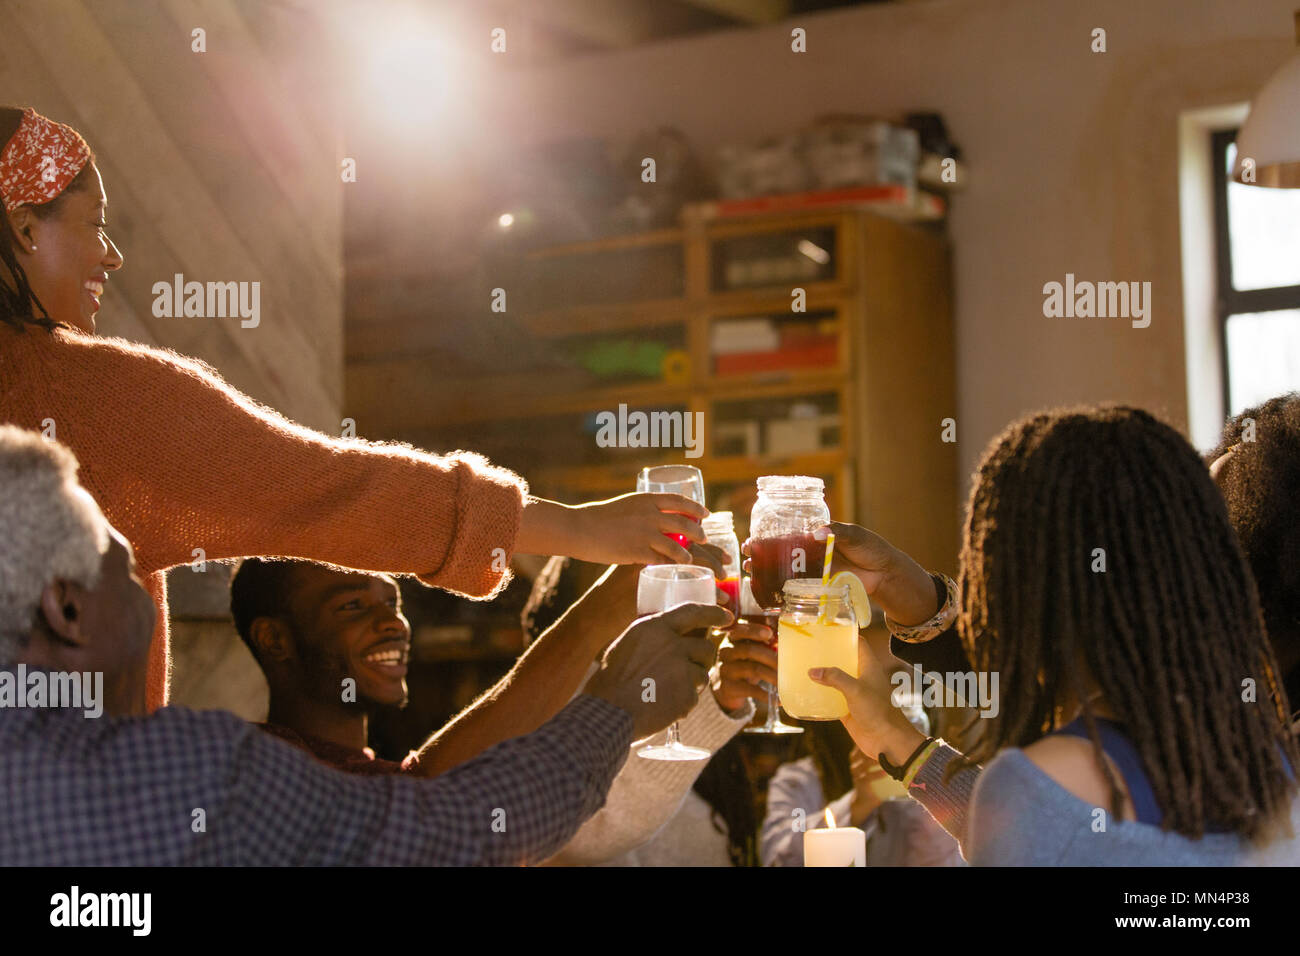 Family toasting lemonade and sangria glasses at dinner party Stock Photo